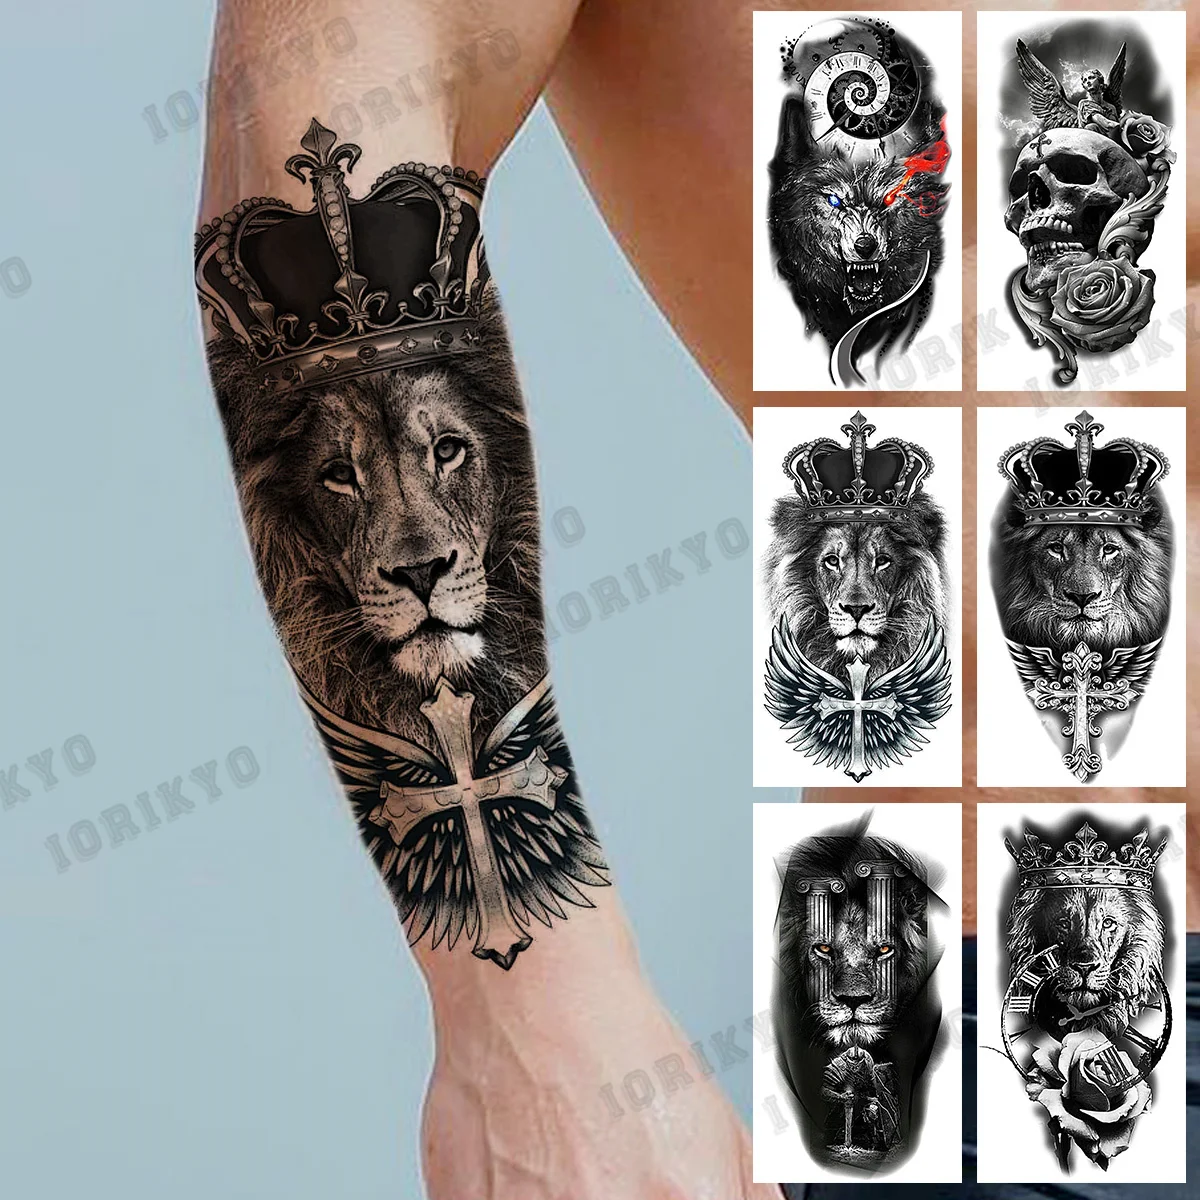 

3D Black Lion Wings Cross Crown Temporary Tattoos For Men Adult Wolf Skull Rose Flower Compass Fake Tattoofashion Forearm Tatoos